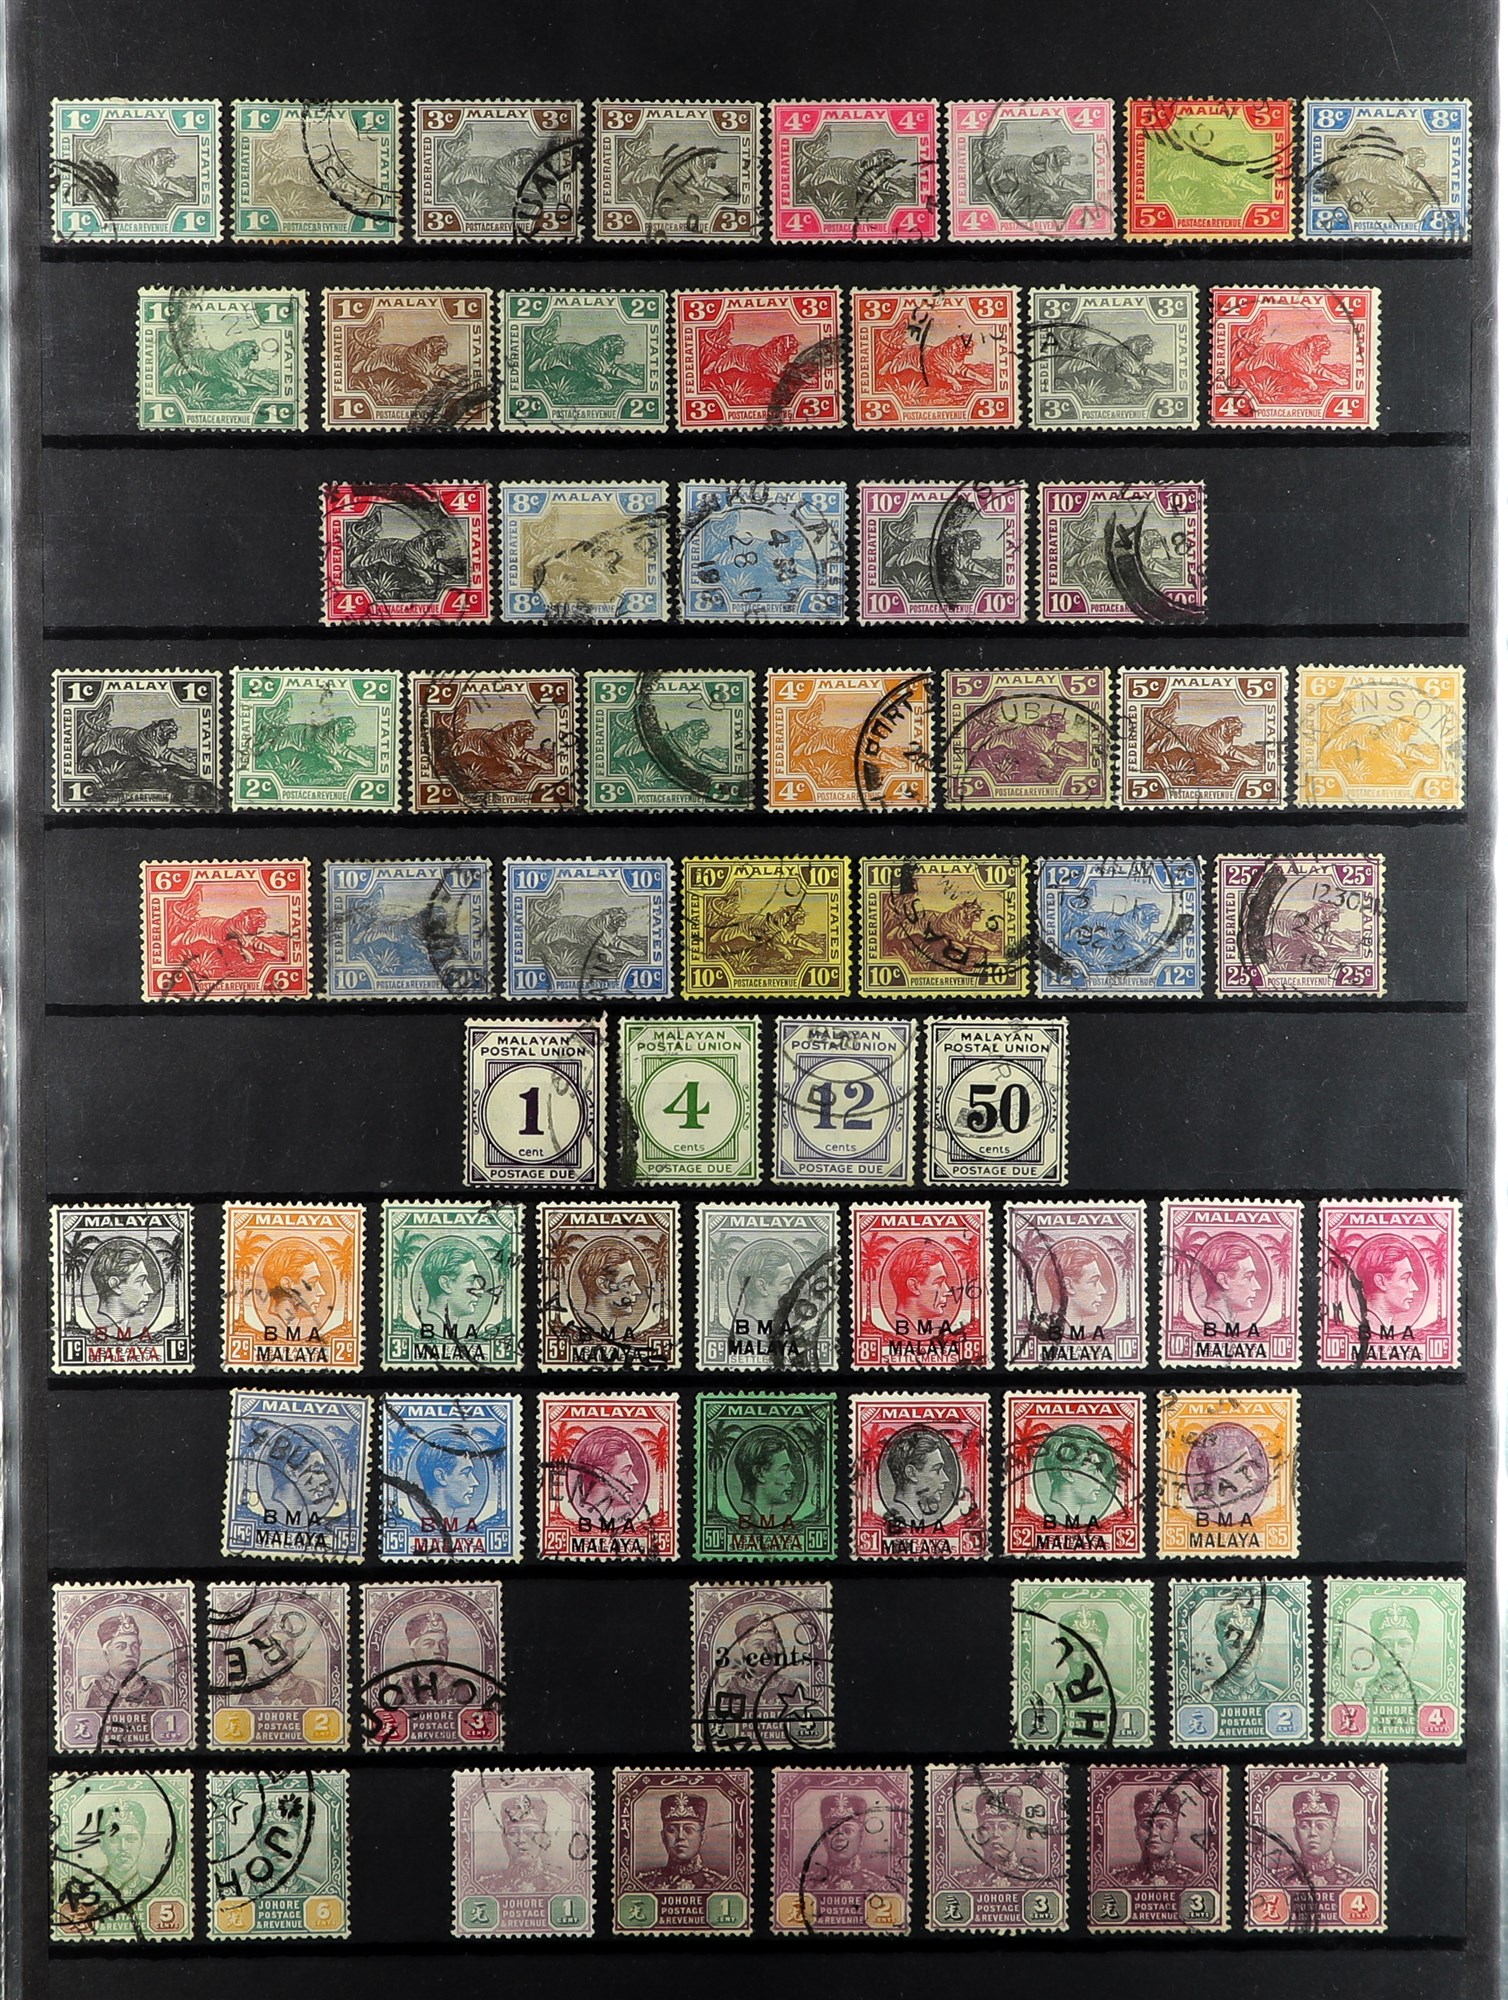 MALAYA STATES 1881-1986 USED COLLECTION of around 900 stamps on protective pages, many higher